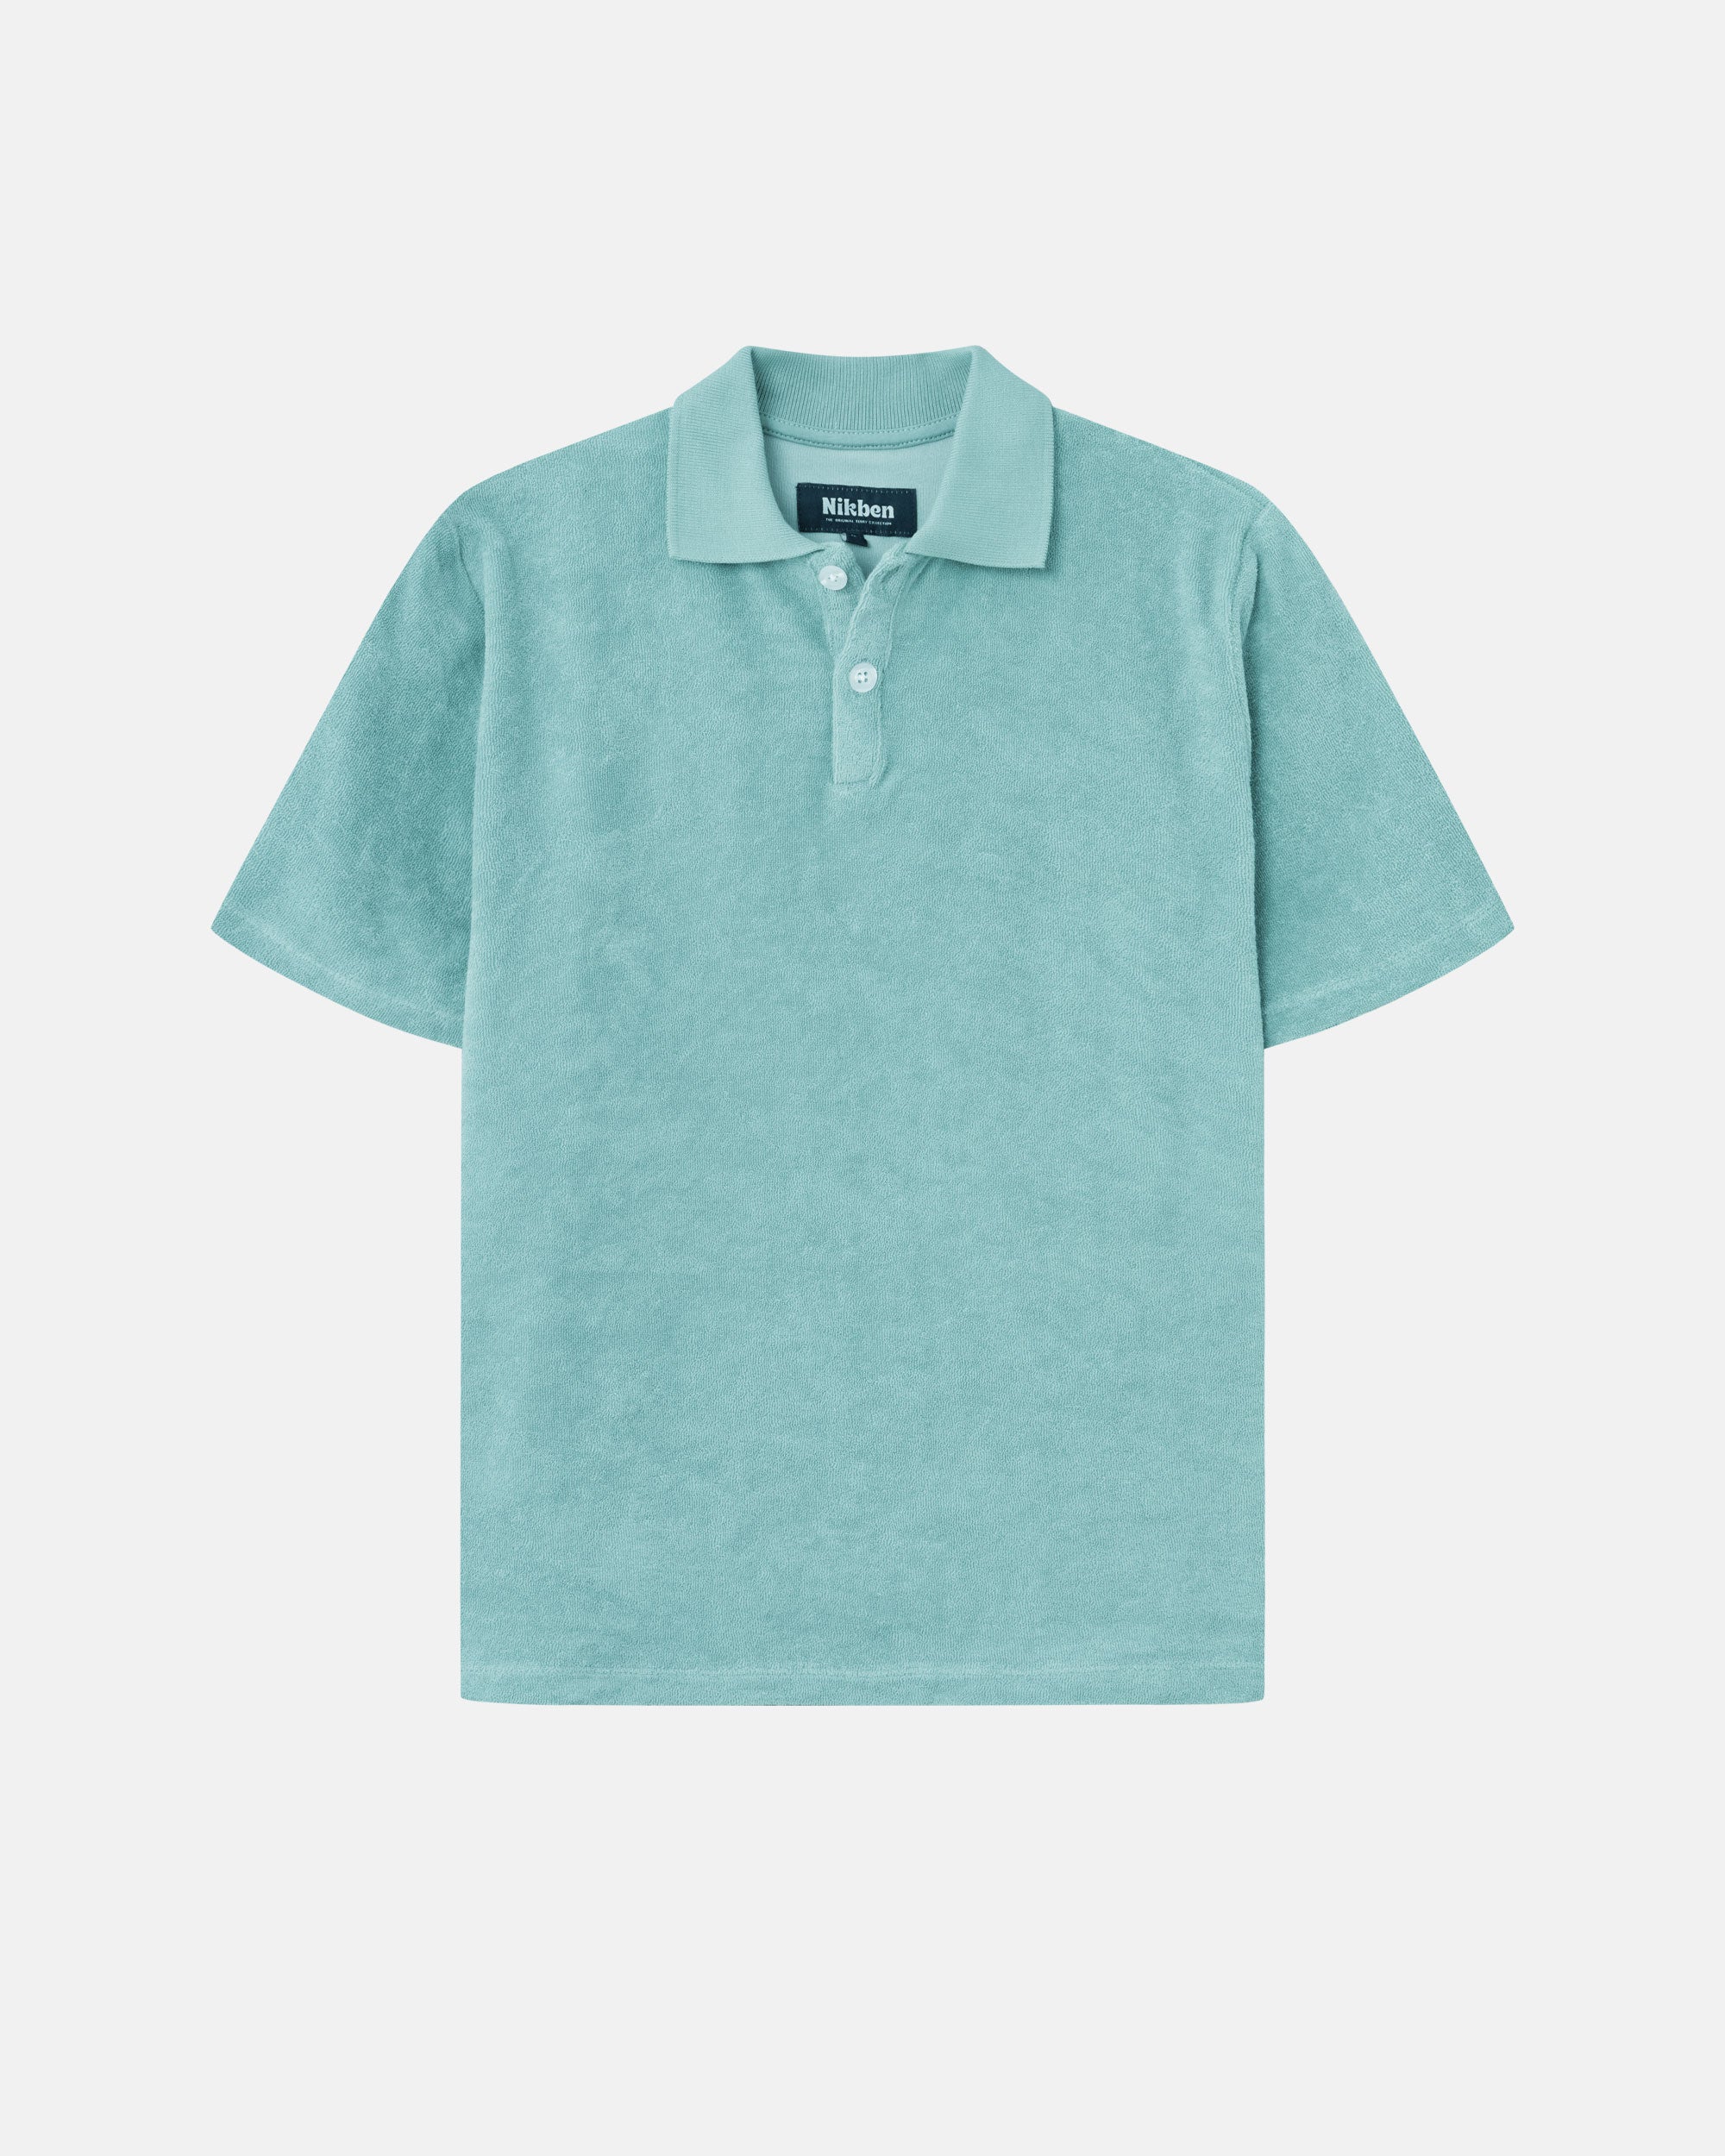 Grey-green short sleeve piké shirt for kids in terry toweling fabric.